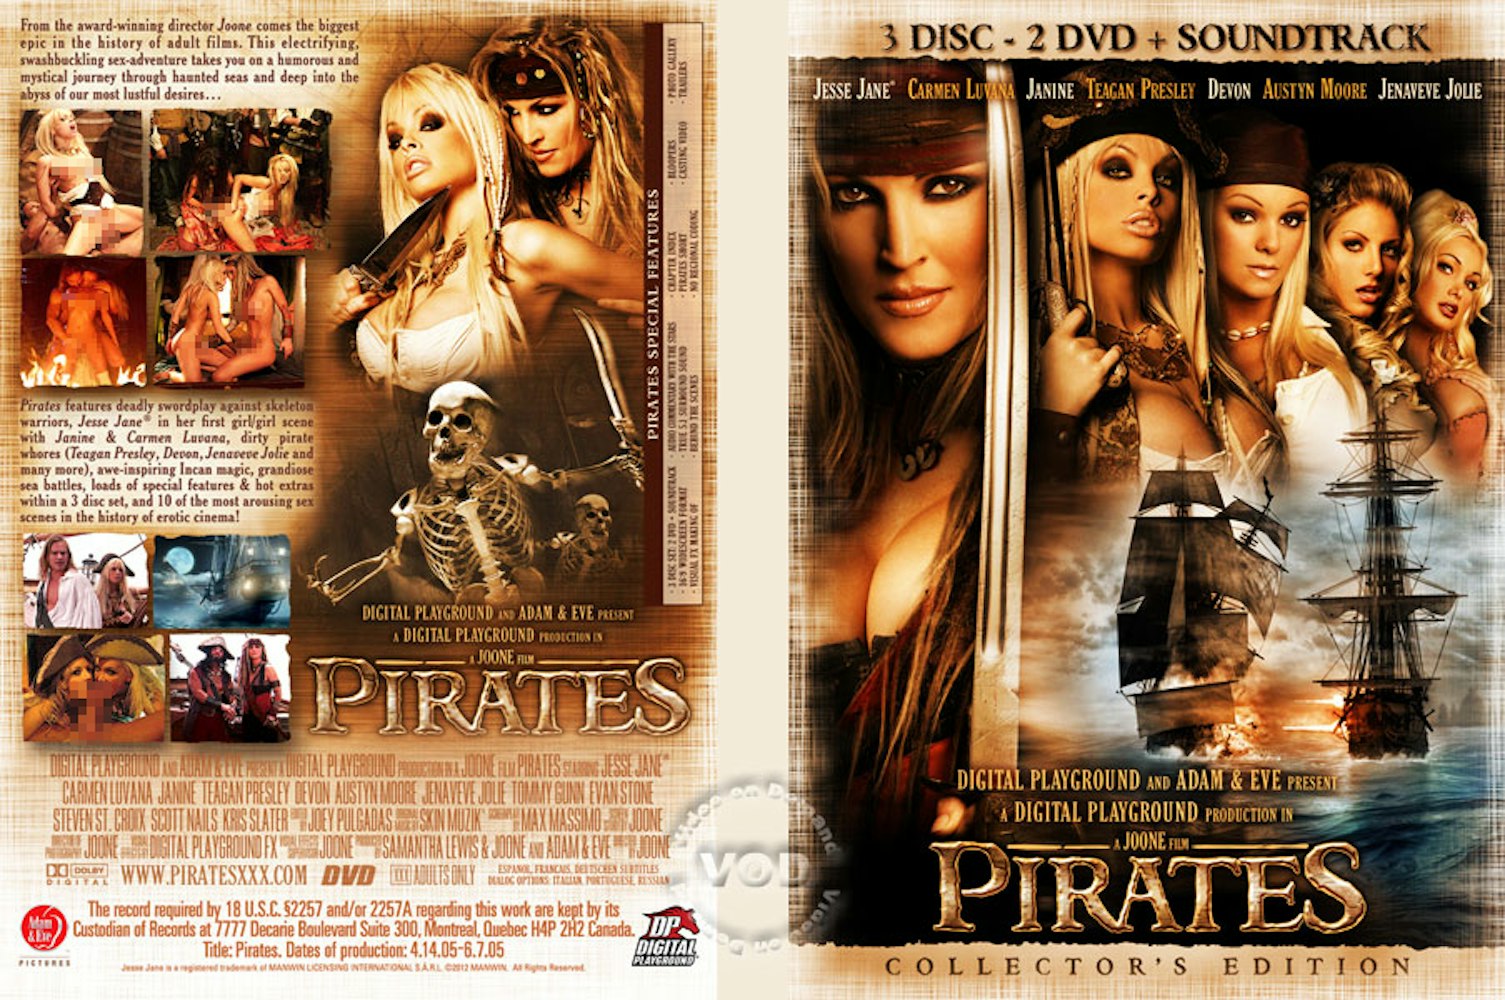 The cover art for Pirates, a famous porn parody inspired by Pirates of the Caribbean.